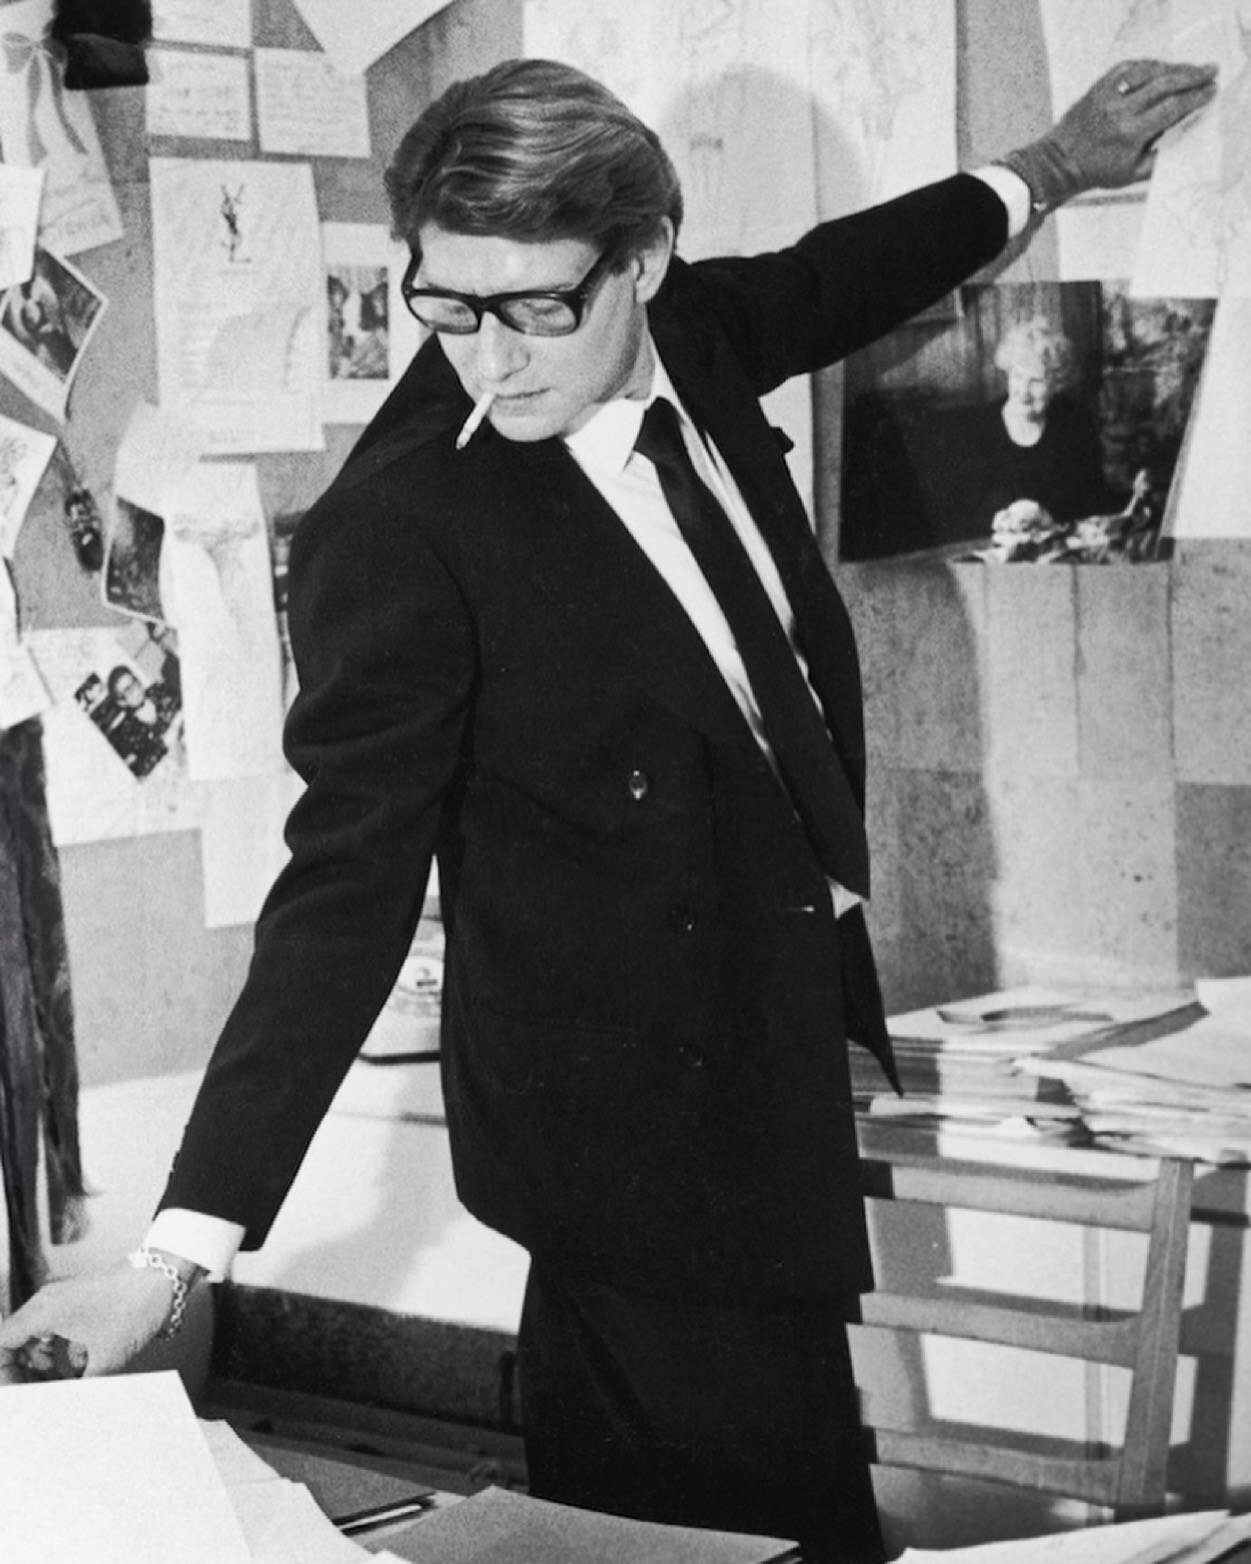 Yves Henri Donat Matthieu-Saint-Laurent (1936-2008)
 In celebration of pride month, the designer and innovator of Saint Laurent. 
An icon in the making he was able to push his potential after working for Christian Dior in Paris. Yves showed his worth